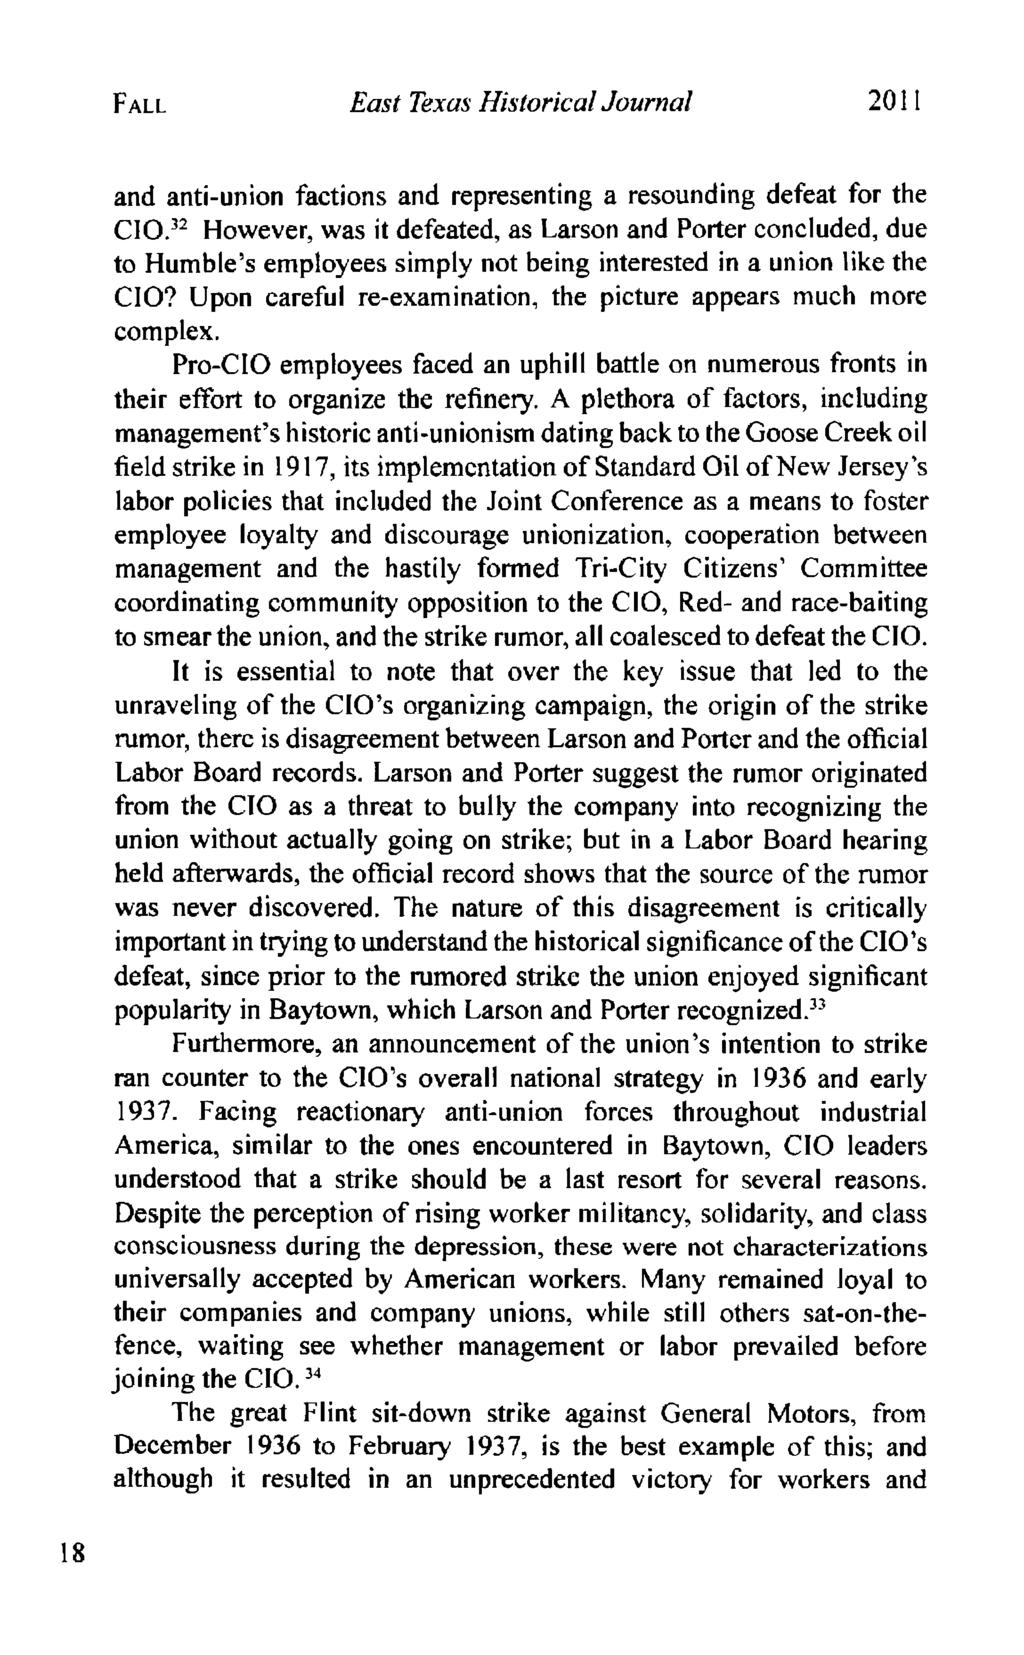 FALL East Texas Historical Journal 2011 and anti-union factions and representing a resounding defeat for the CIO.